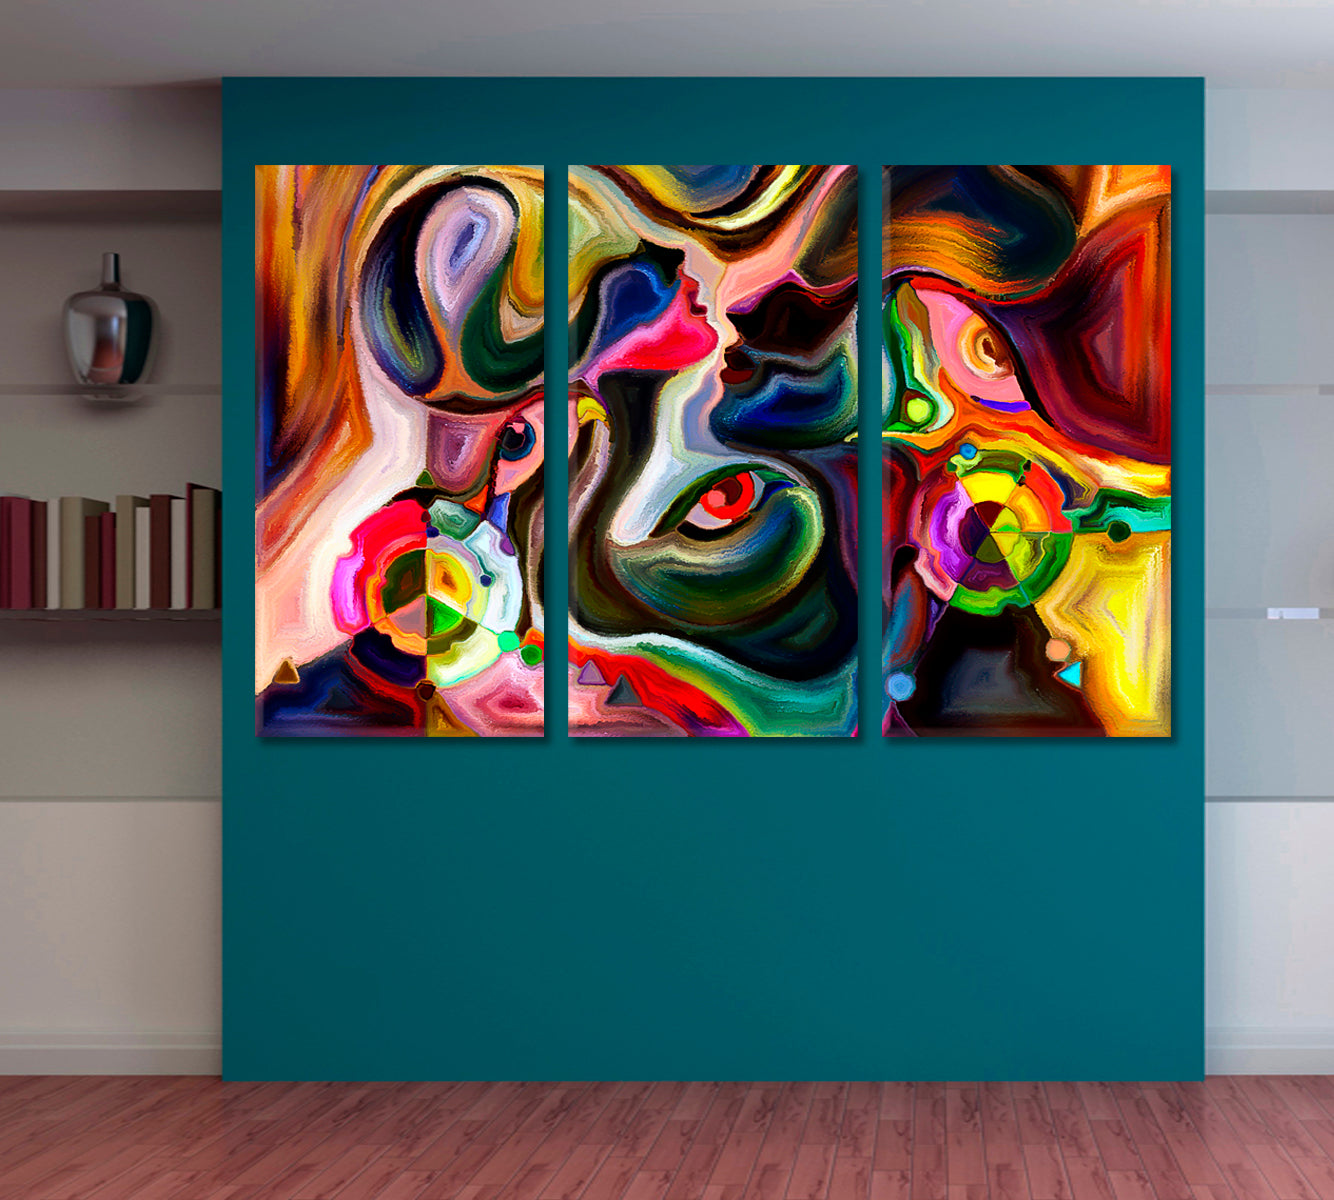 World Inside Of Colors And Shapes Contemporary Art Artesty   